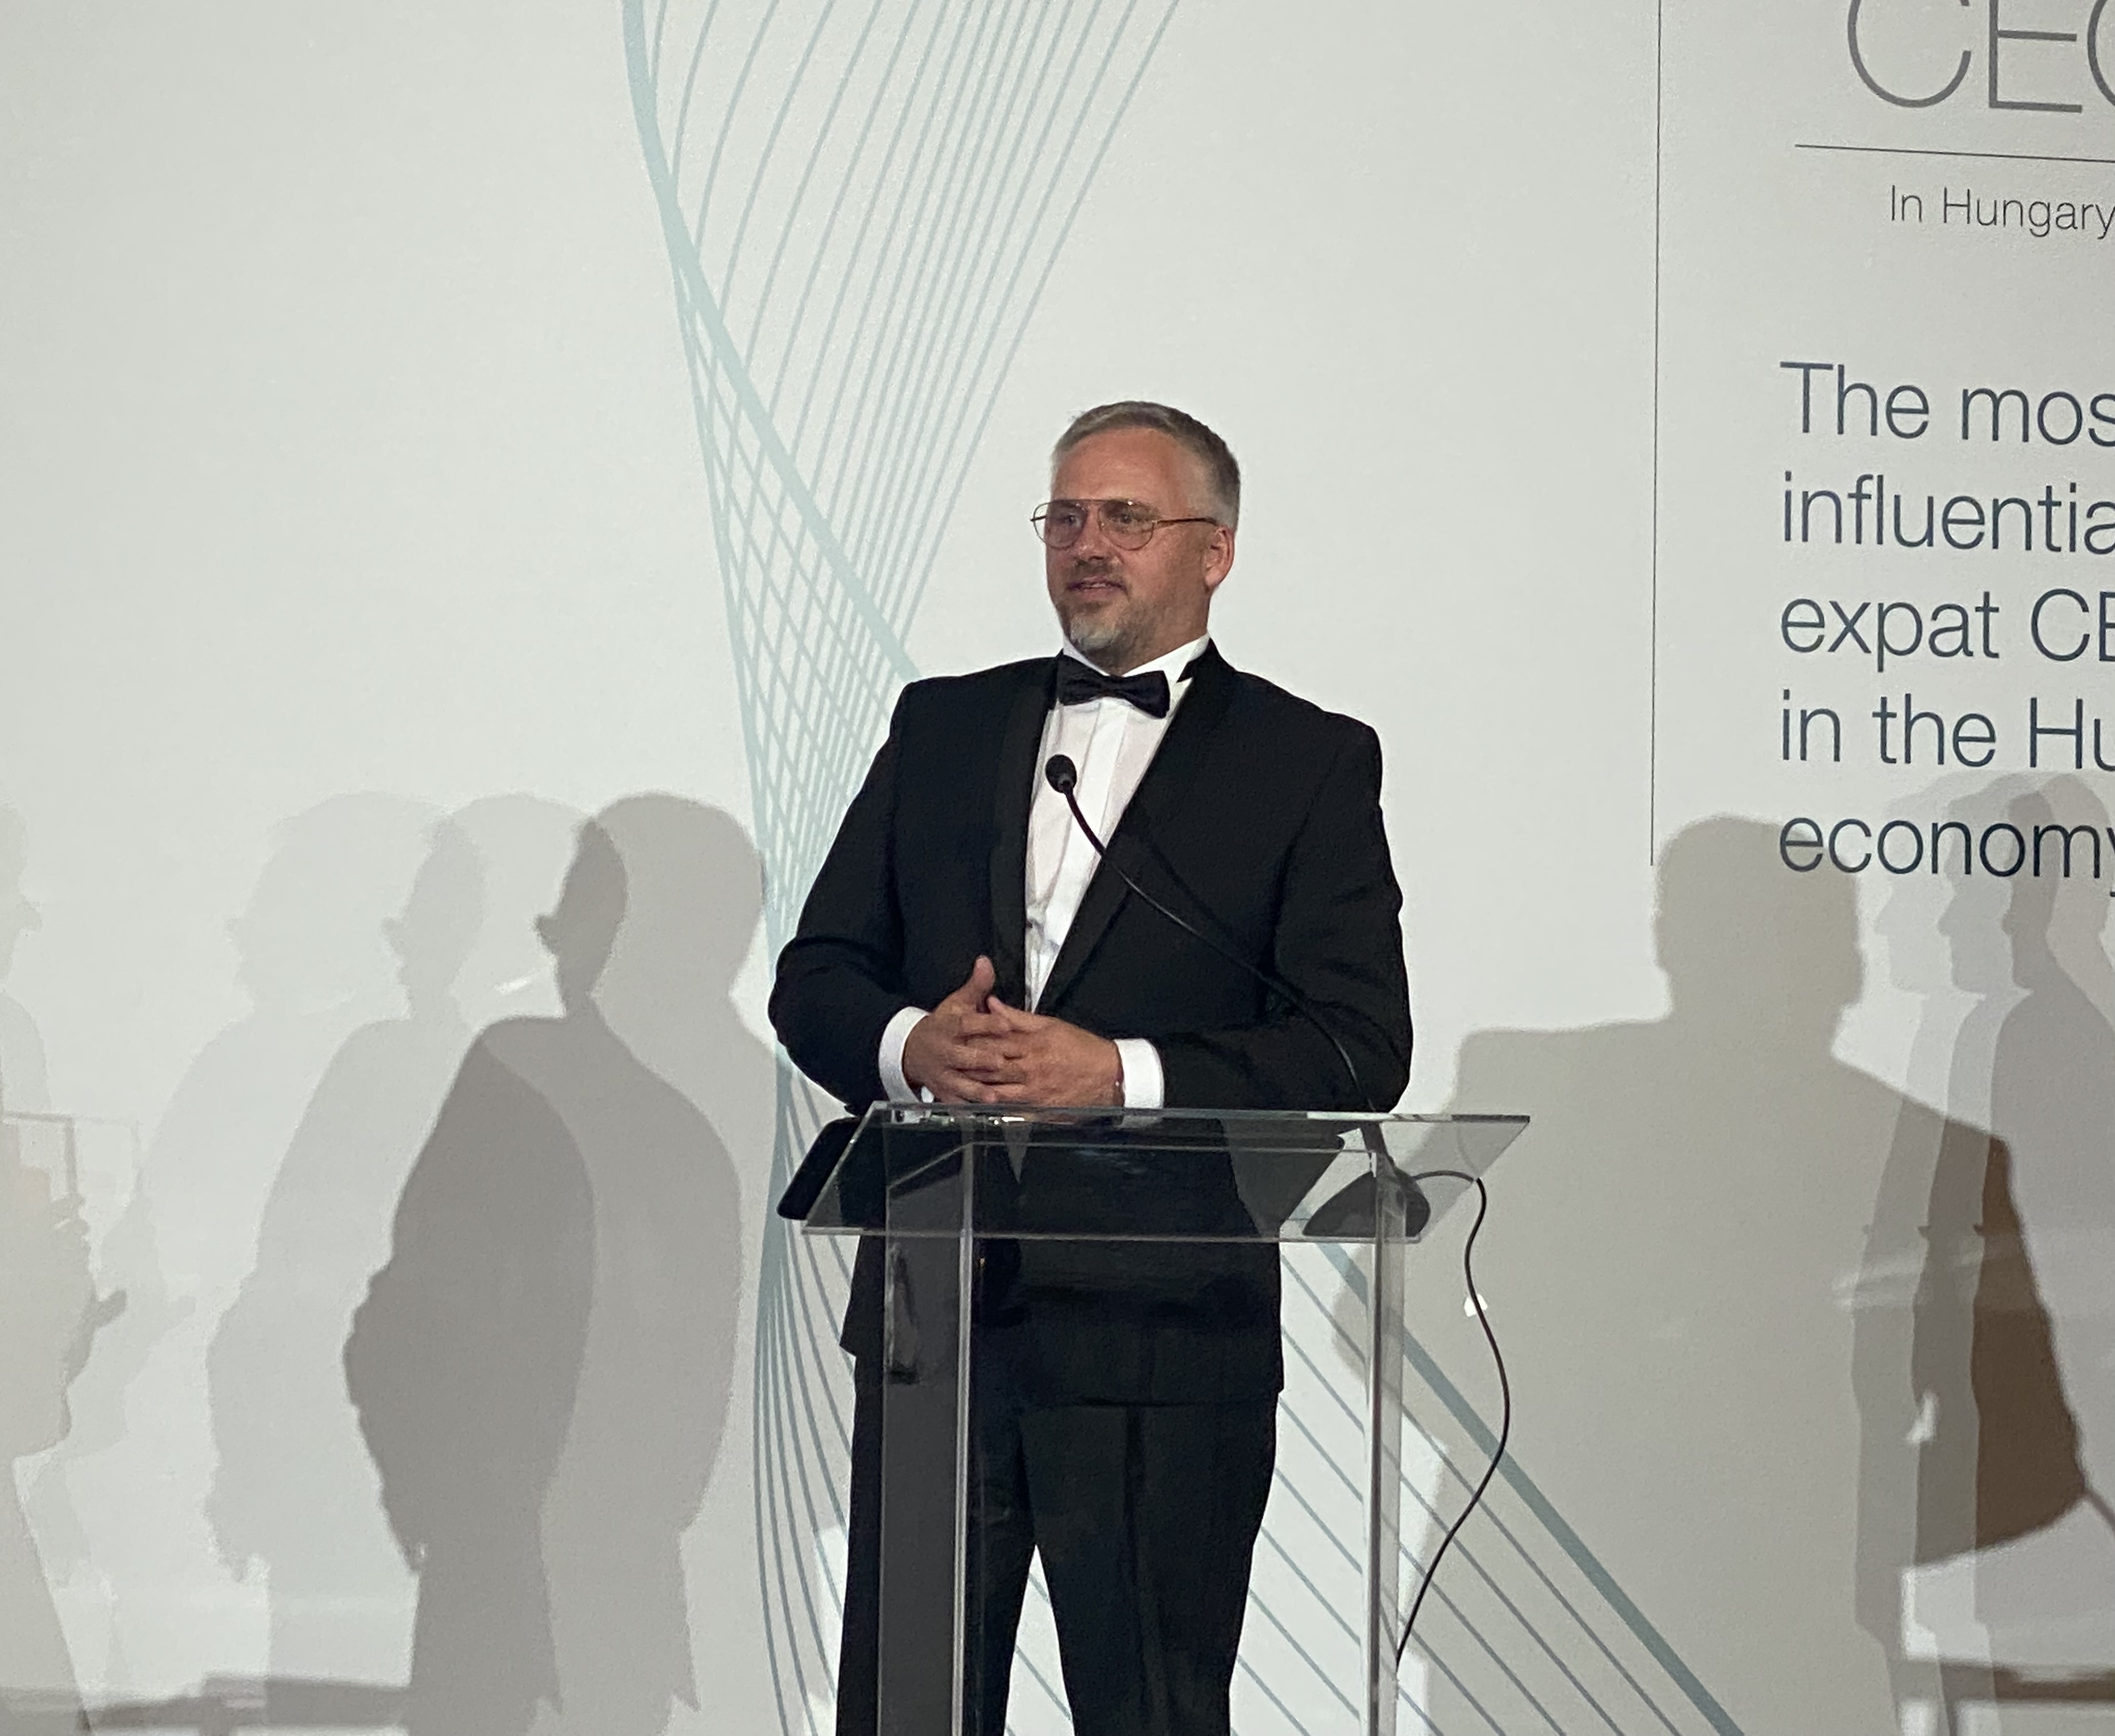 Erik Slooten named Expat CEO of the Year